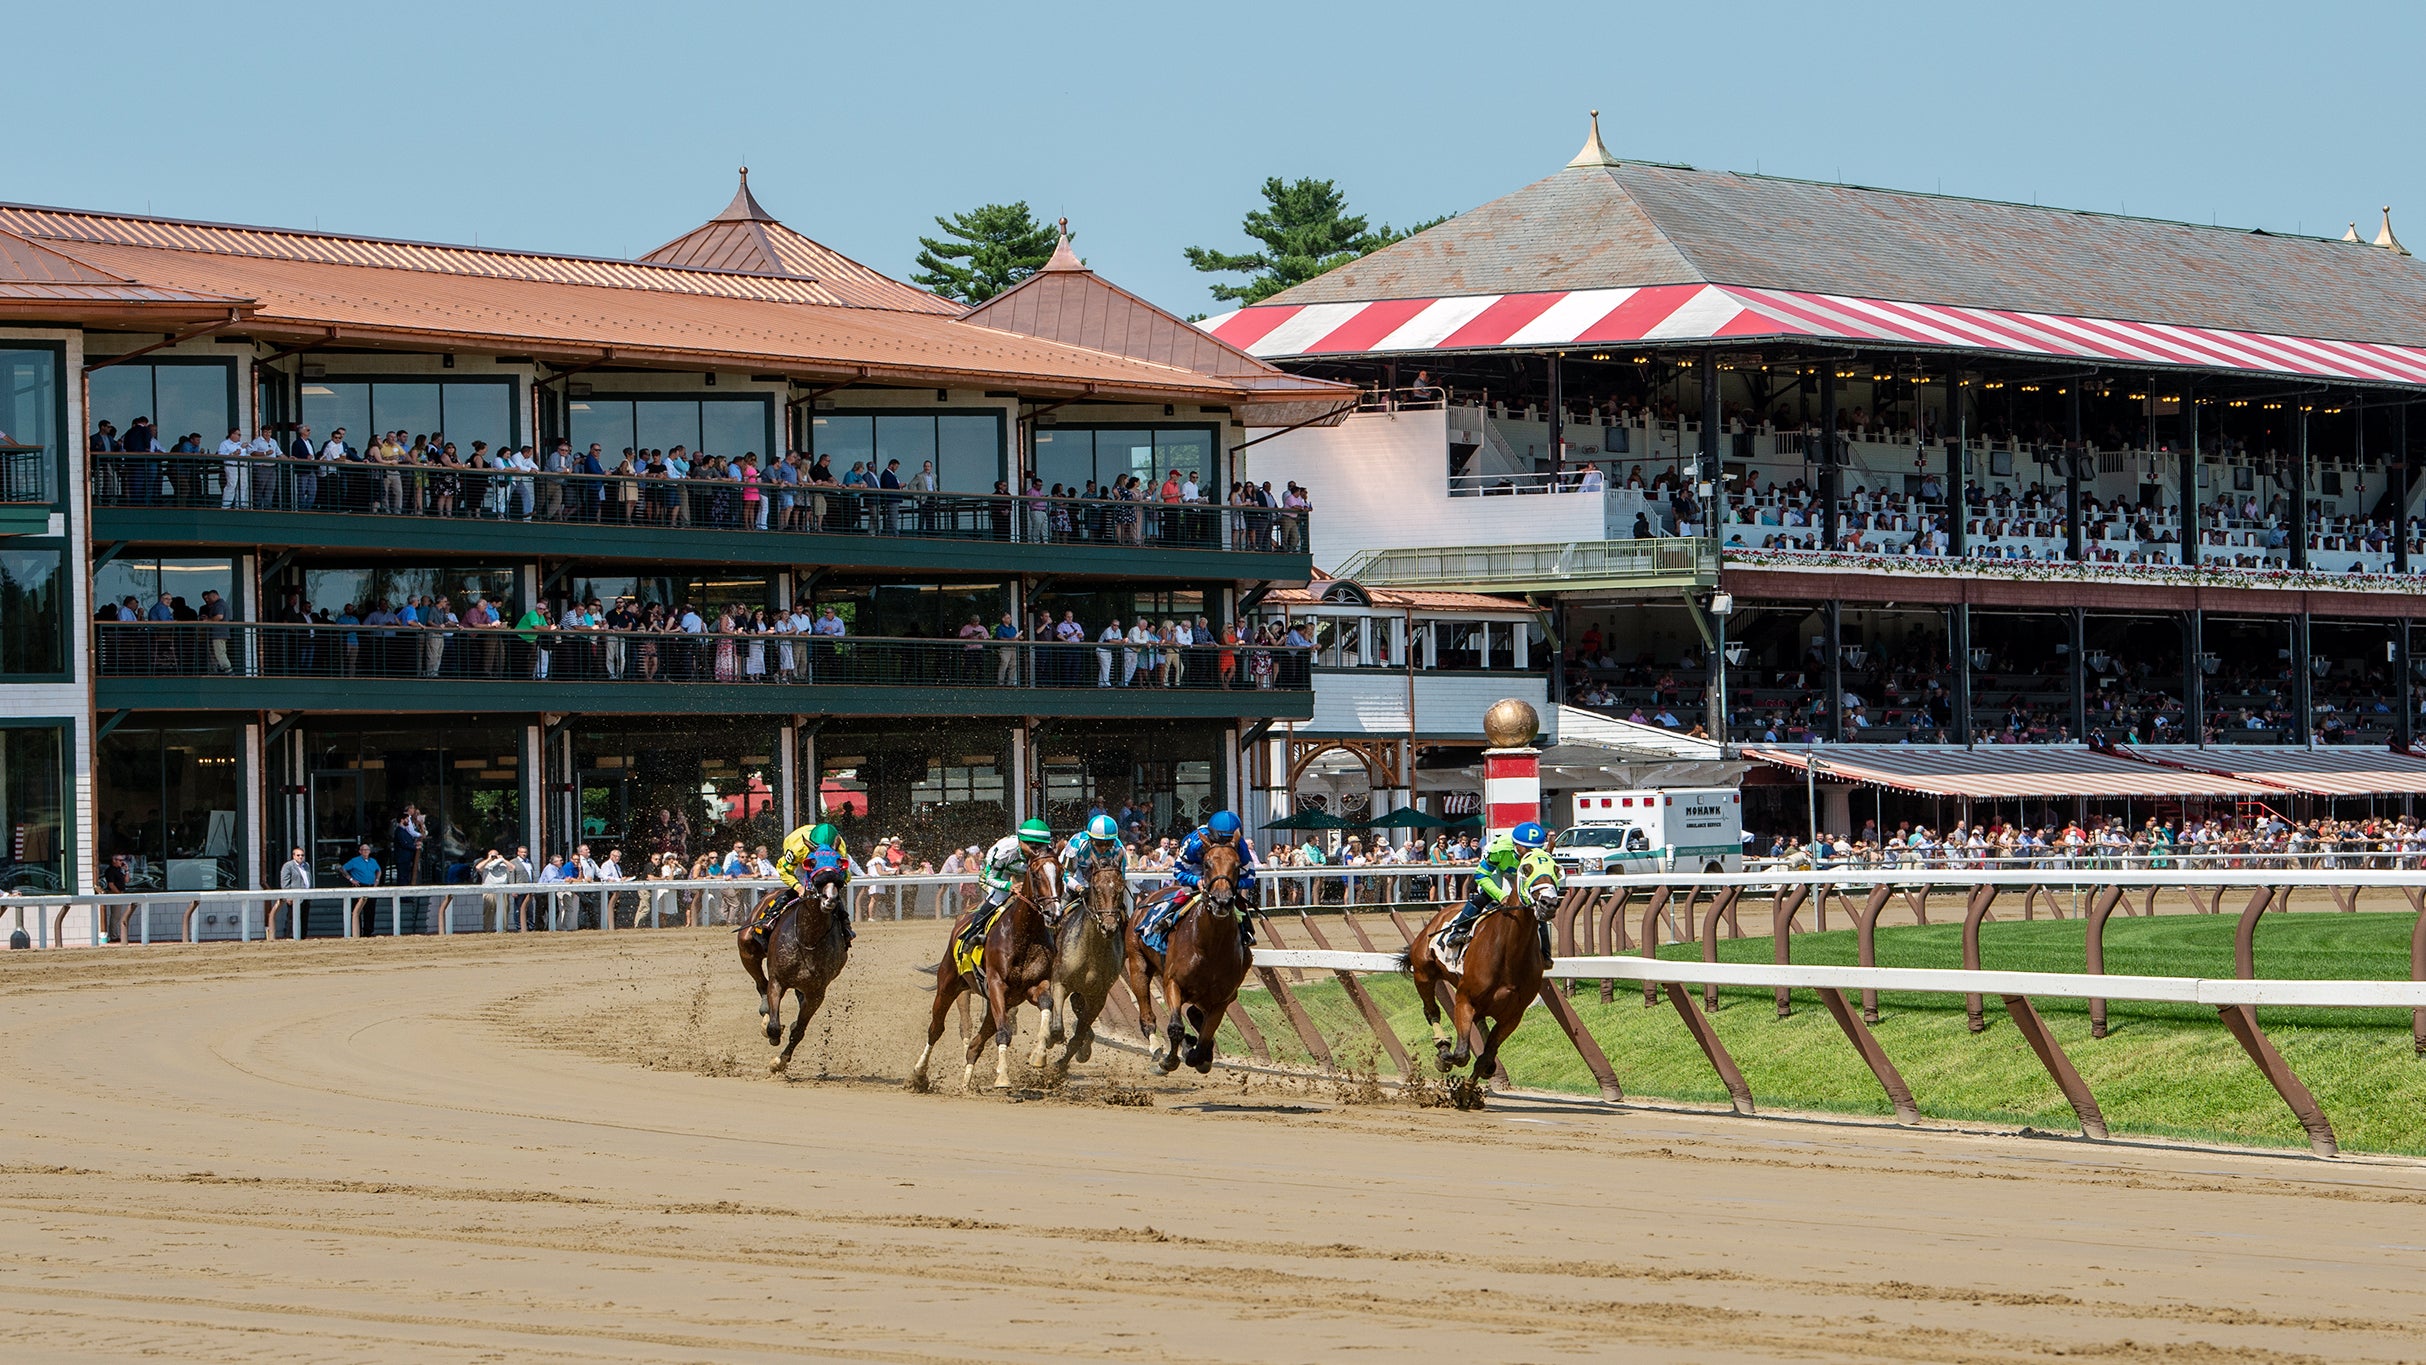 Saratoga Race Course Porch Dining in Saratoga Springs promo photo for Exclusive presale offer code